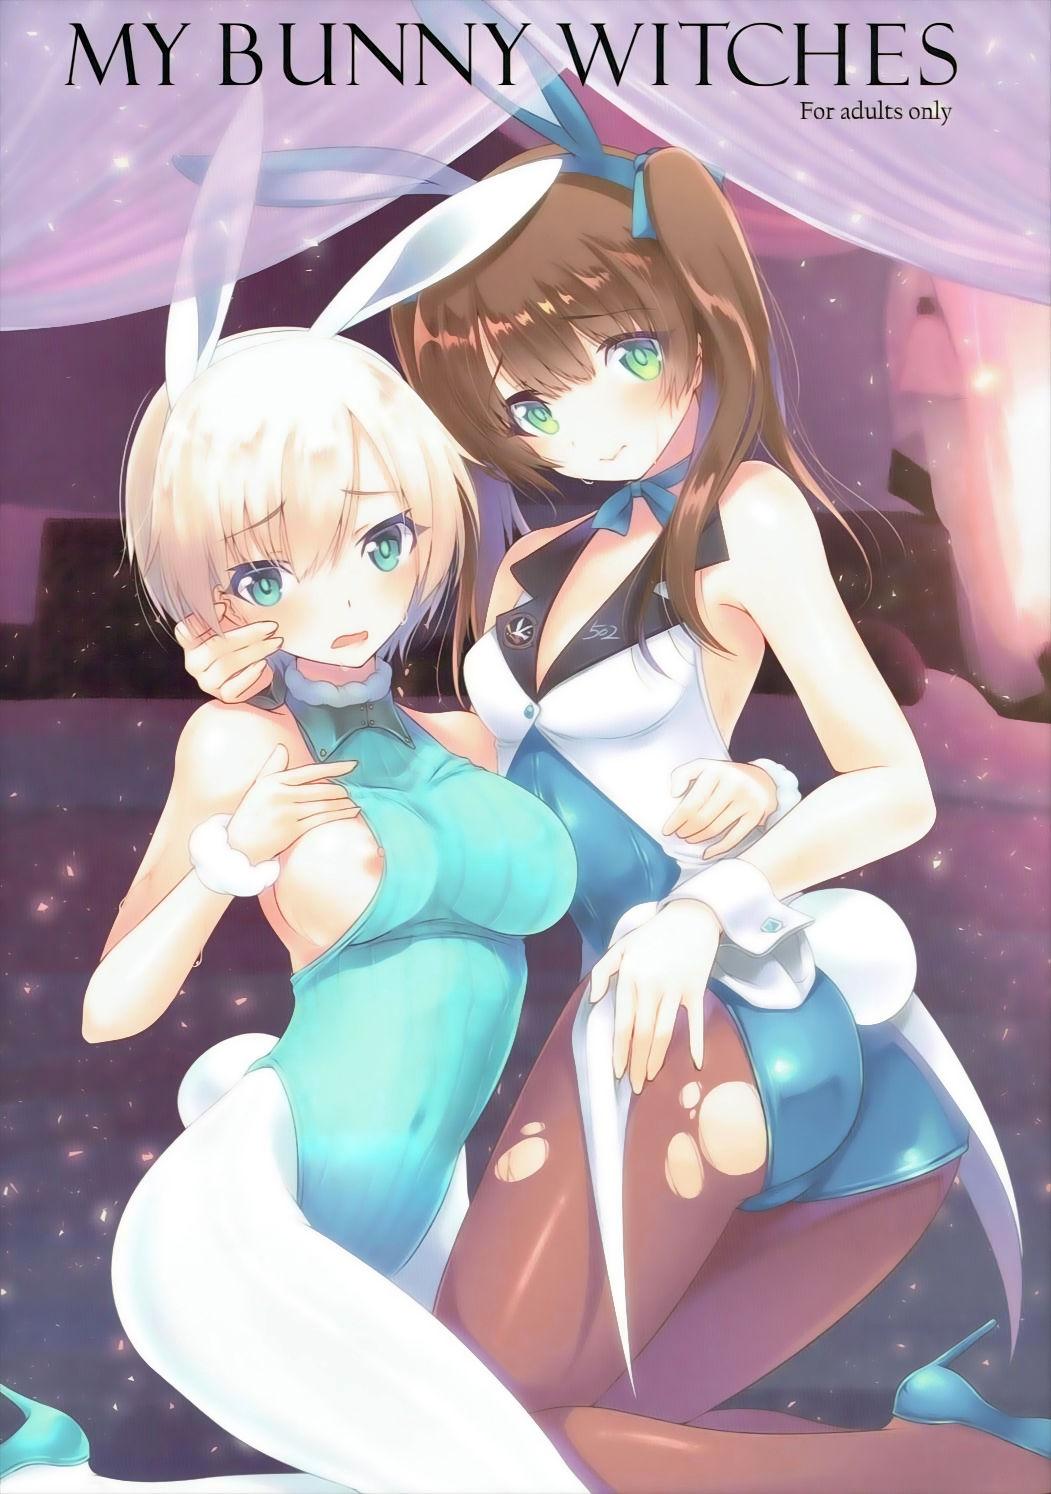 MY BUNNY WITCHES (C91) [slice slime (108号)] (ブレイブウィッチーズ) 0